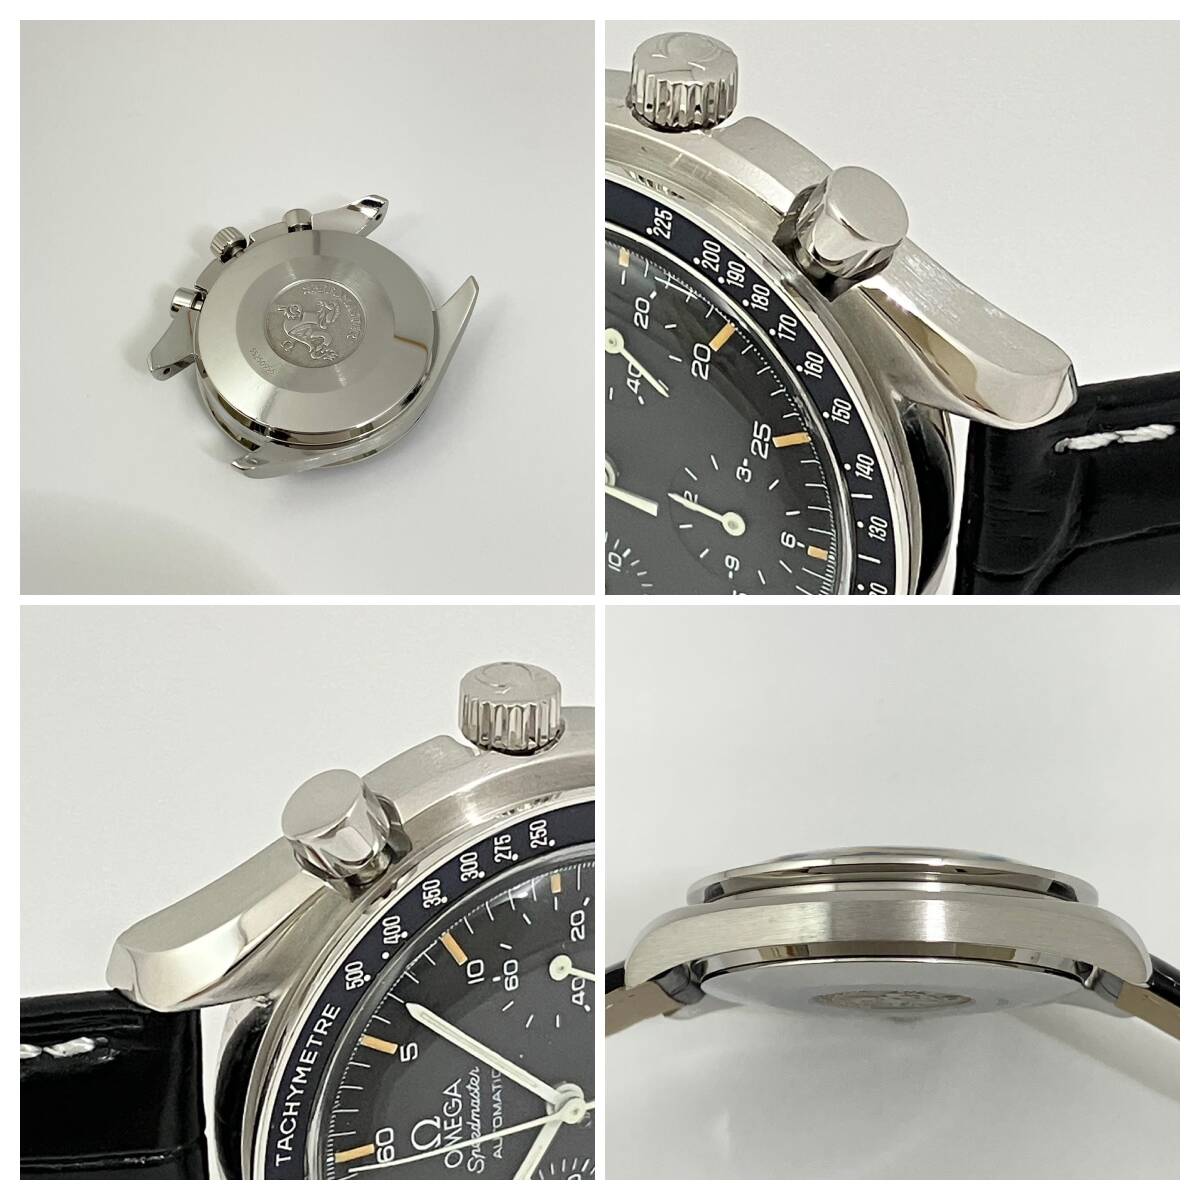  accessory attaching *OH ending ultimate beautiful goods. Omega Speedmaster clock * self-winding watch 3510-50*